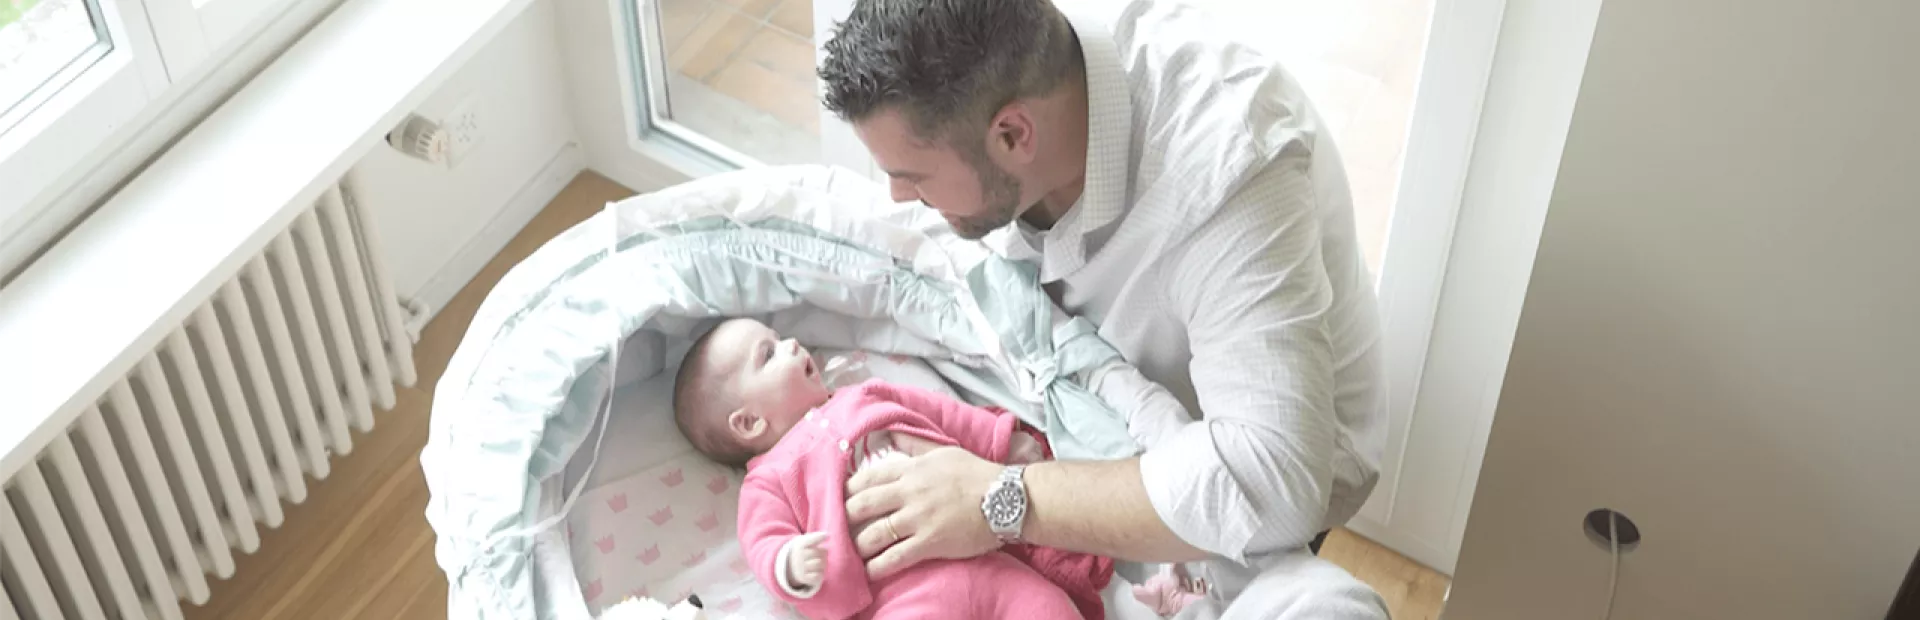 Our new parental leave policy helps Michael to share precious moments with his family